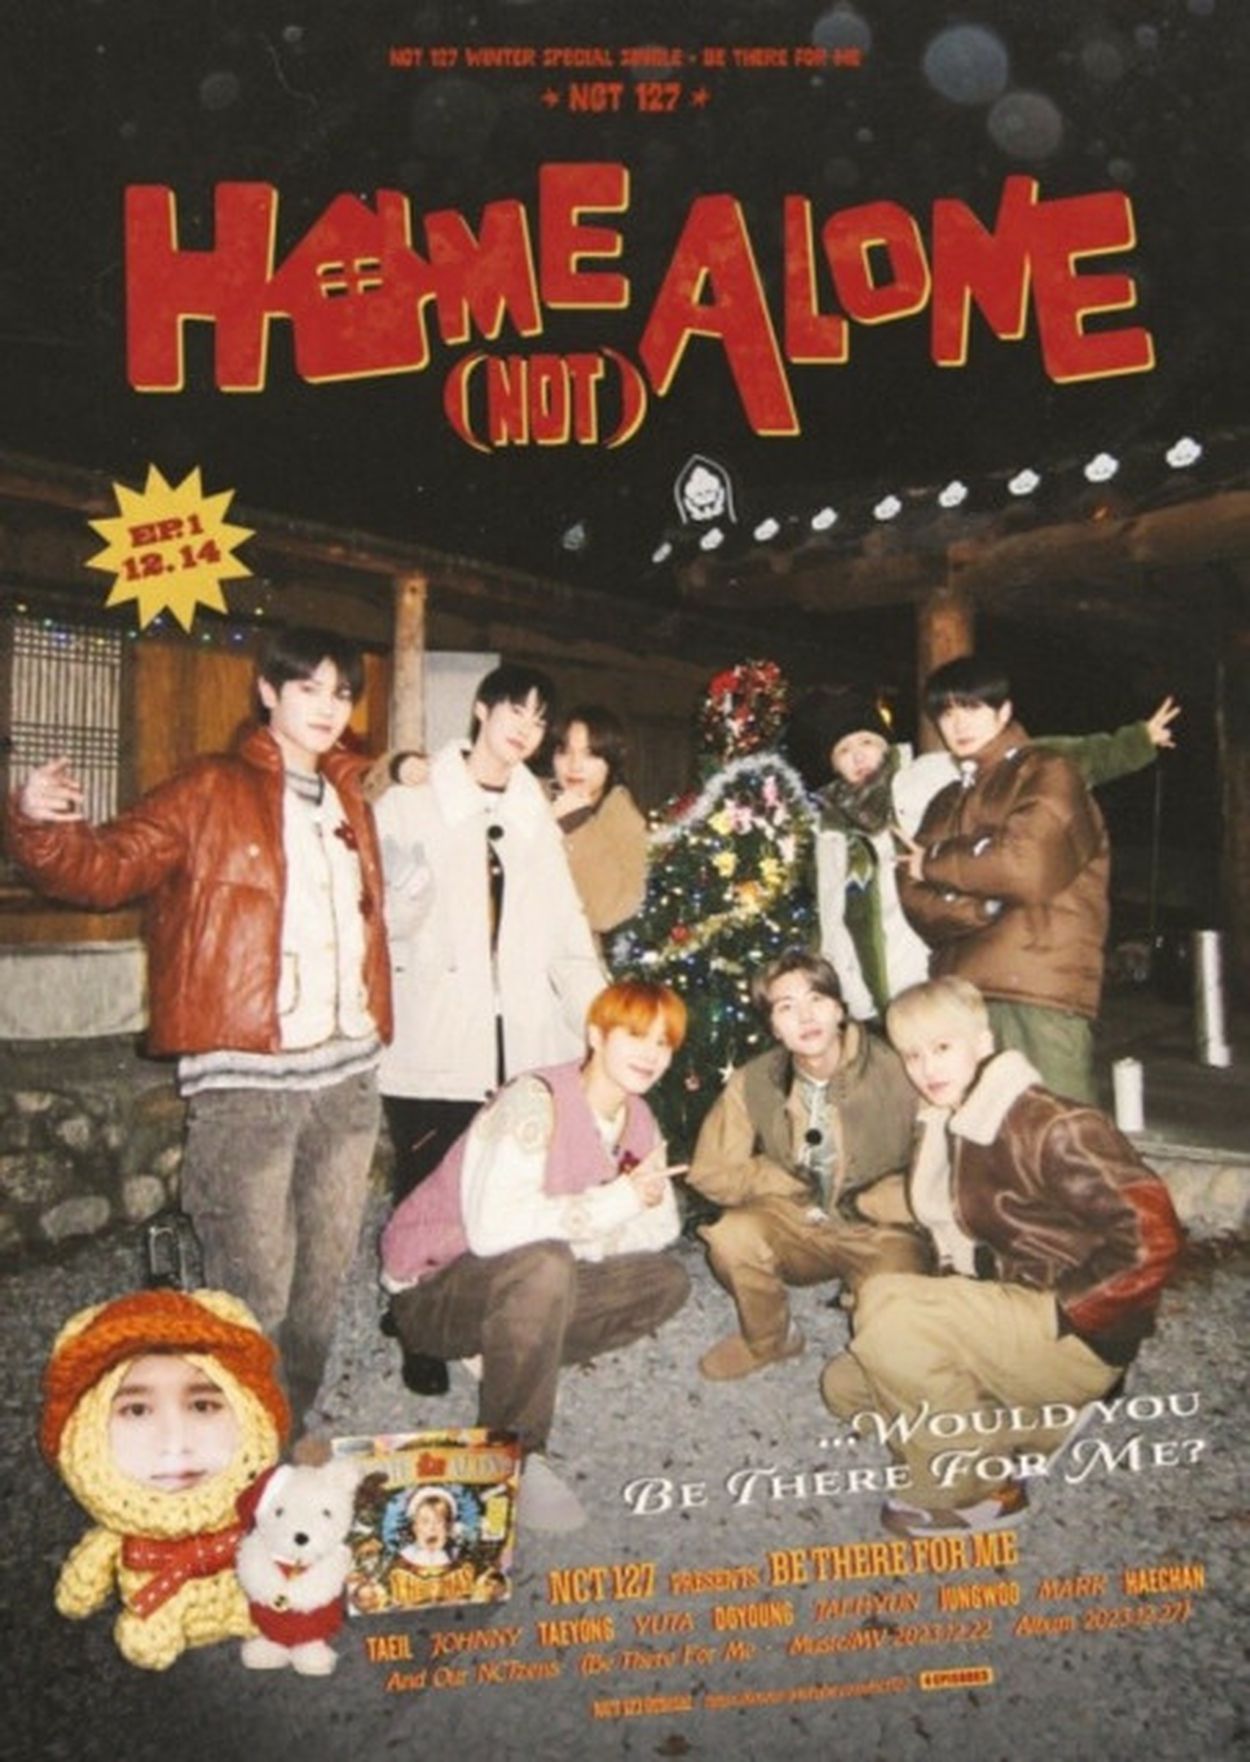 NCT 127」、ウィンターソング発売記念「HOME (NOT) ALONE」コンテンツ 